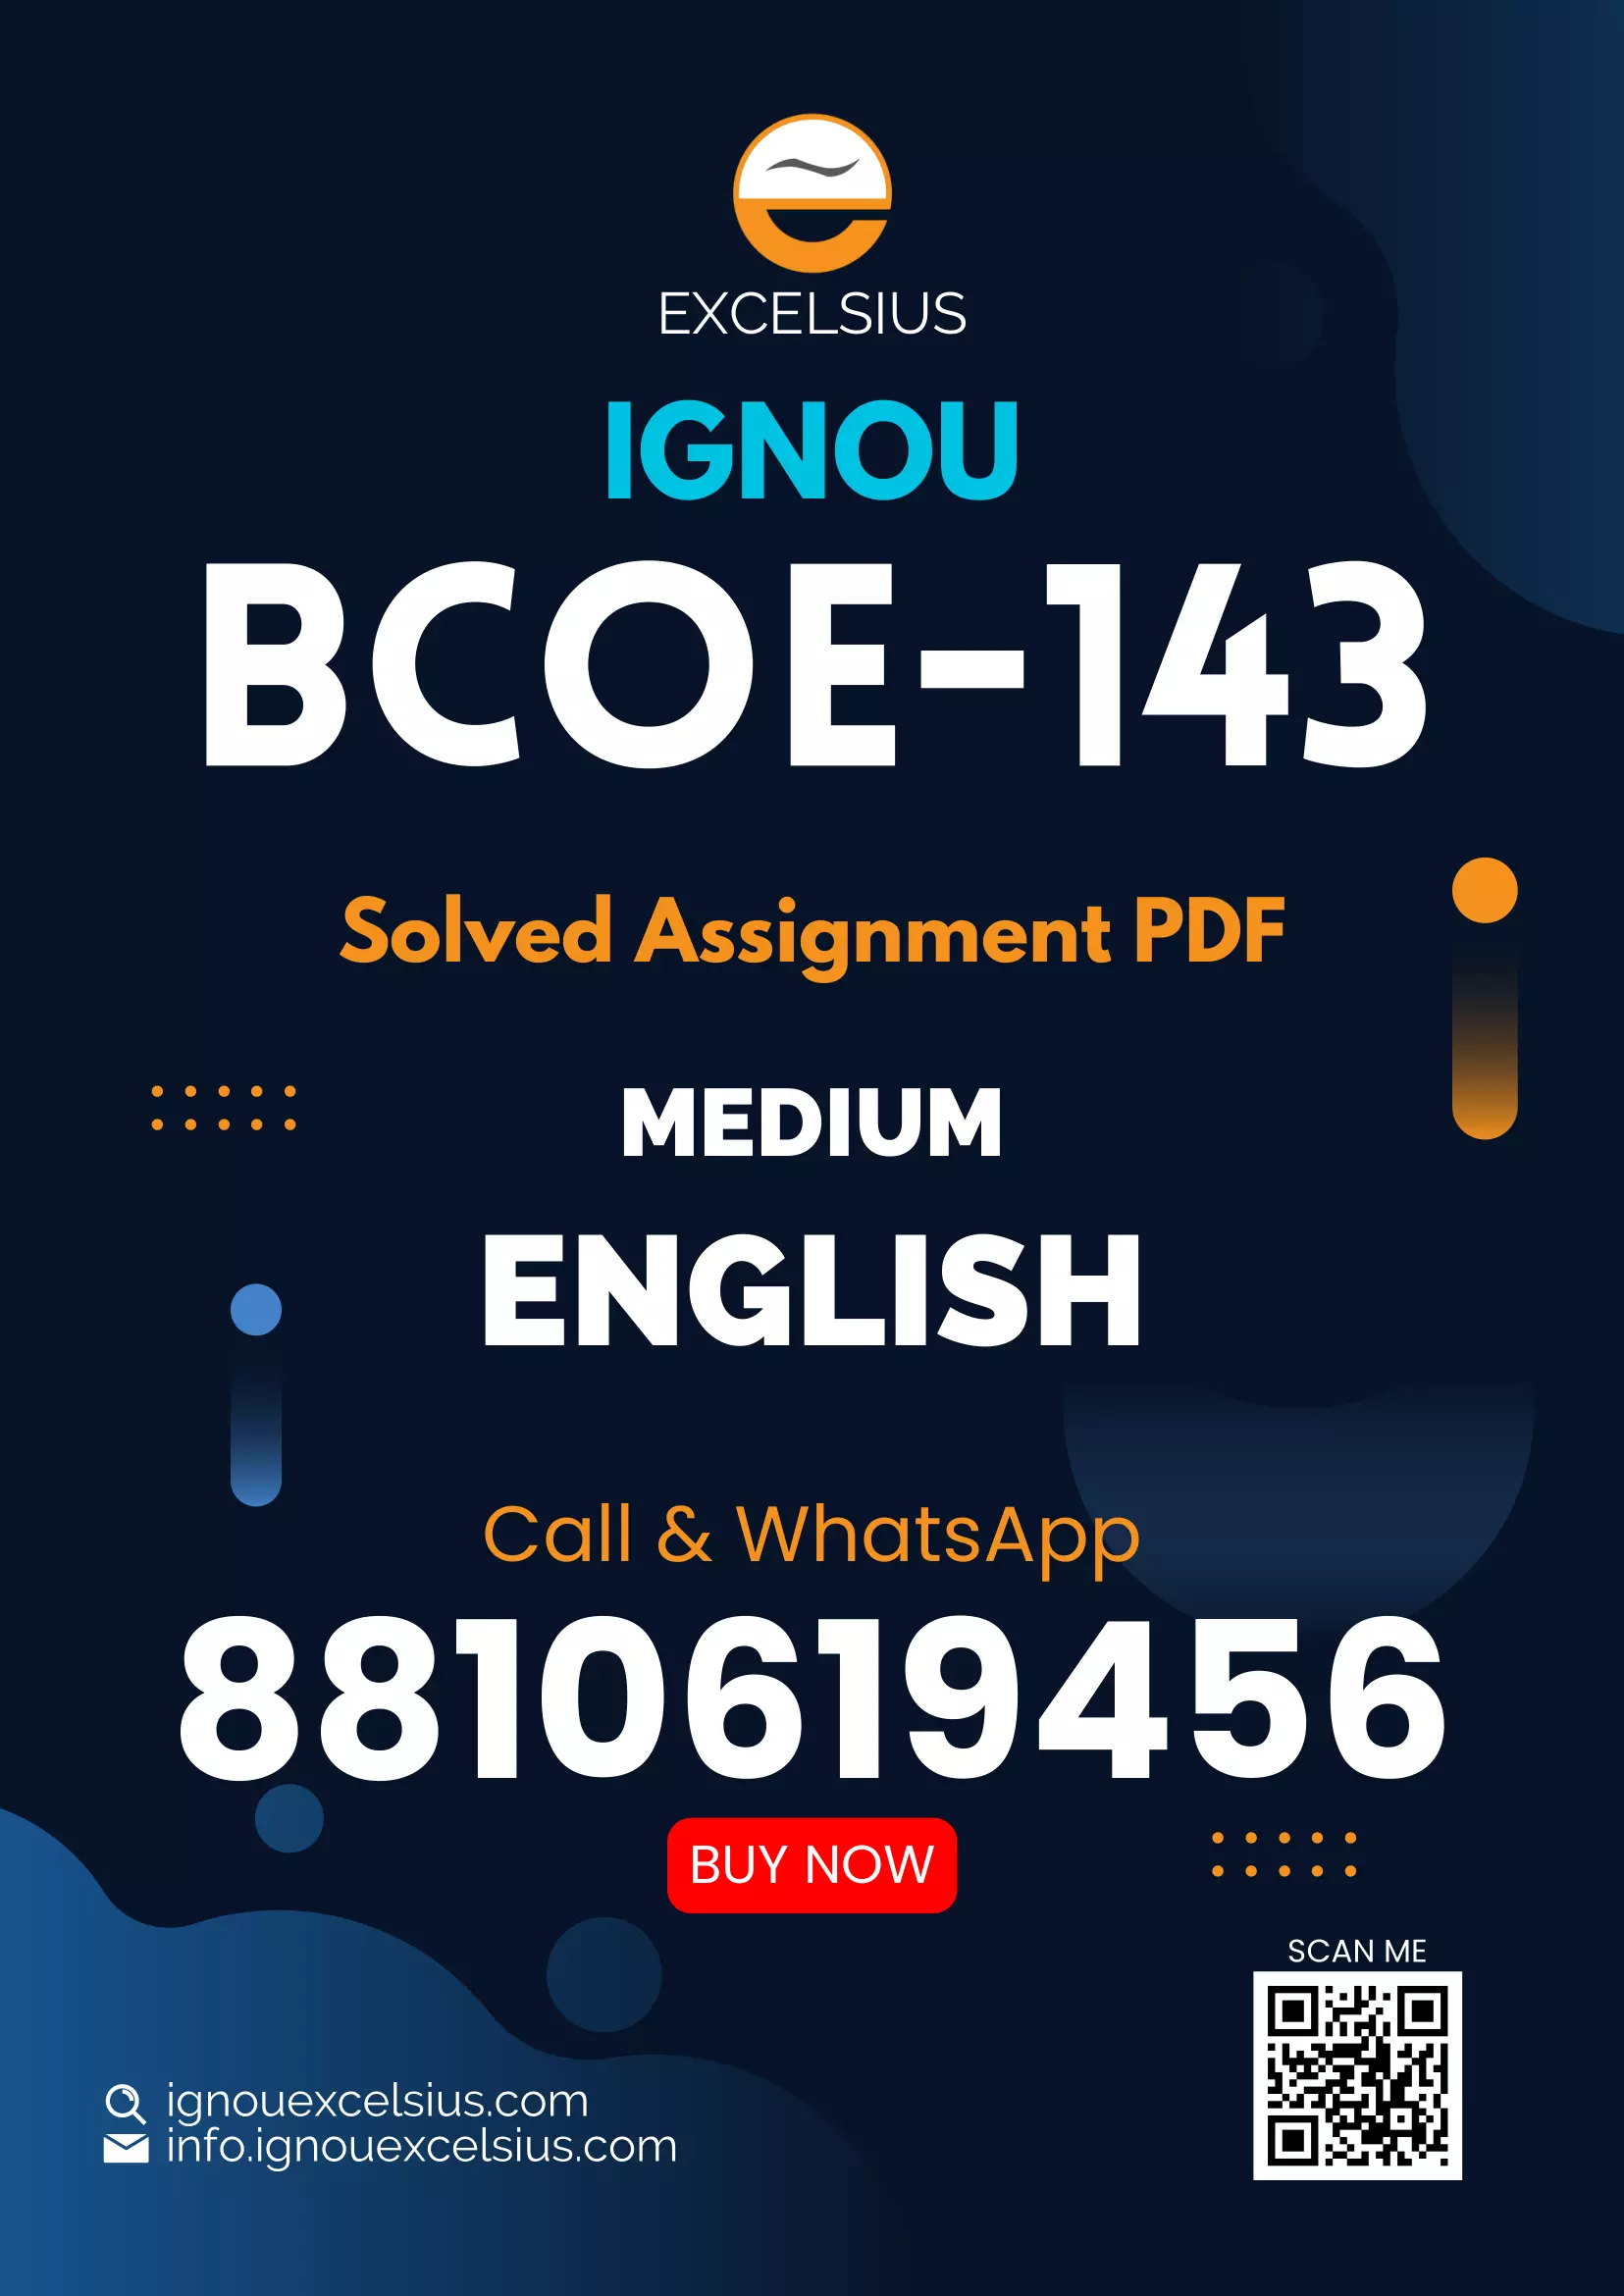 IGNOU BCOE-143 - Fundamentals of Financial Management, Latest Solved Assignment-July 2022 – January 2023